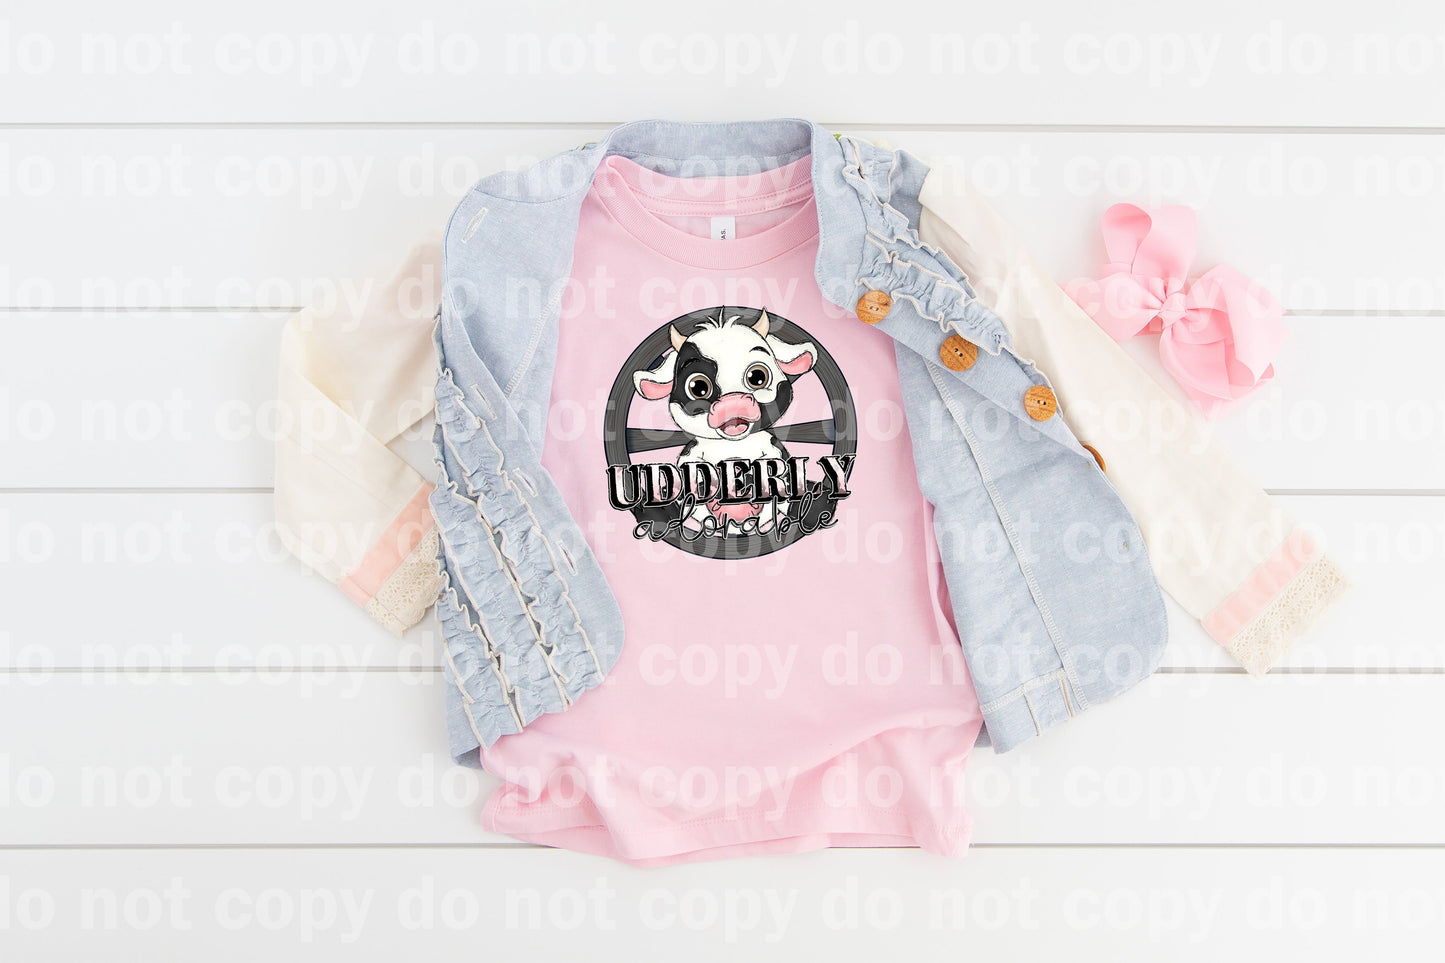 Udderly Adorable Dream Print or Sublimation Print